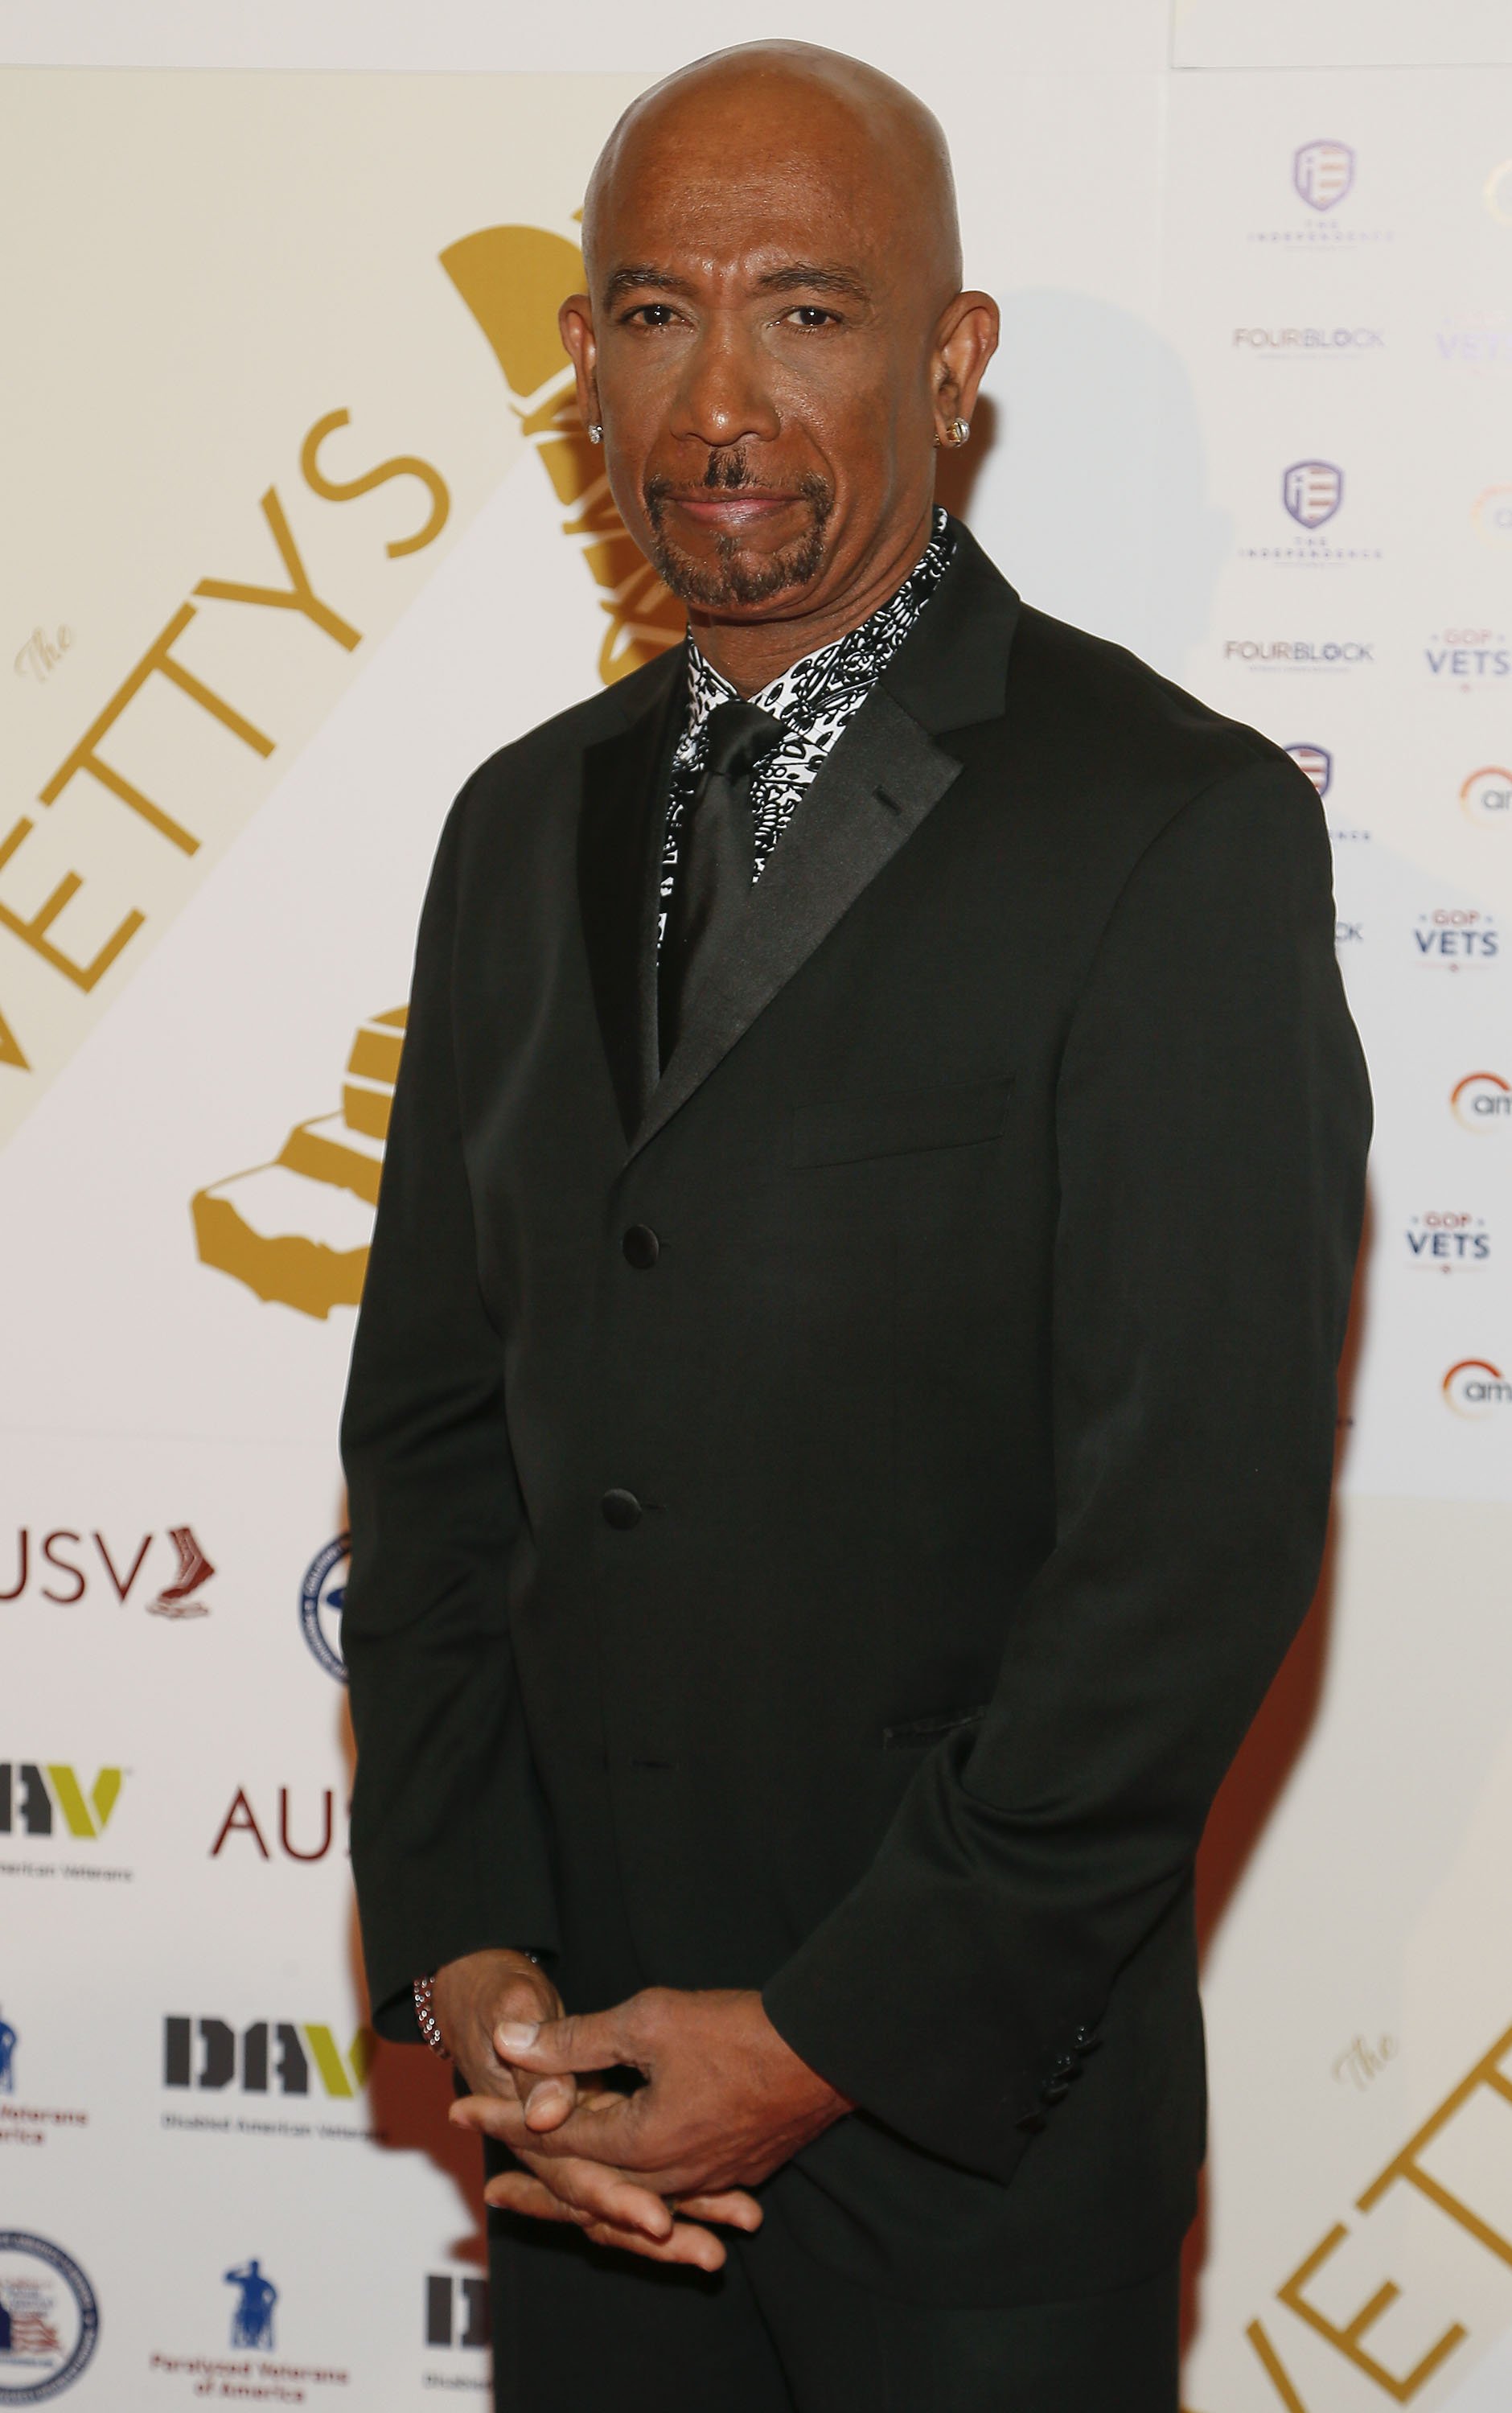 Montel Williams on January 20, 2018 in Washington, DC | Photo: Getty Images